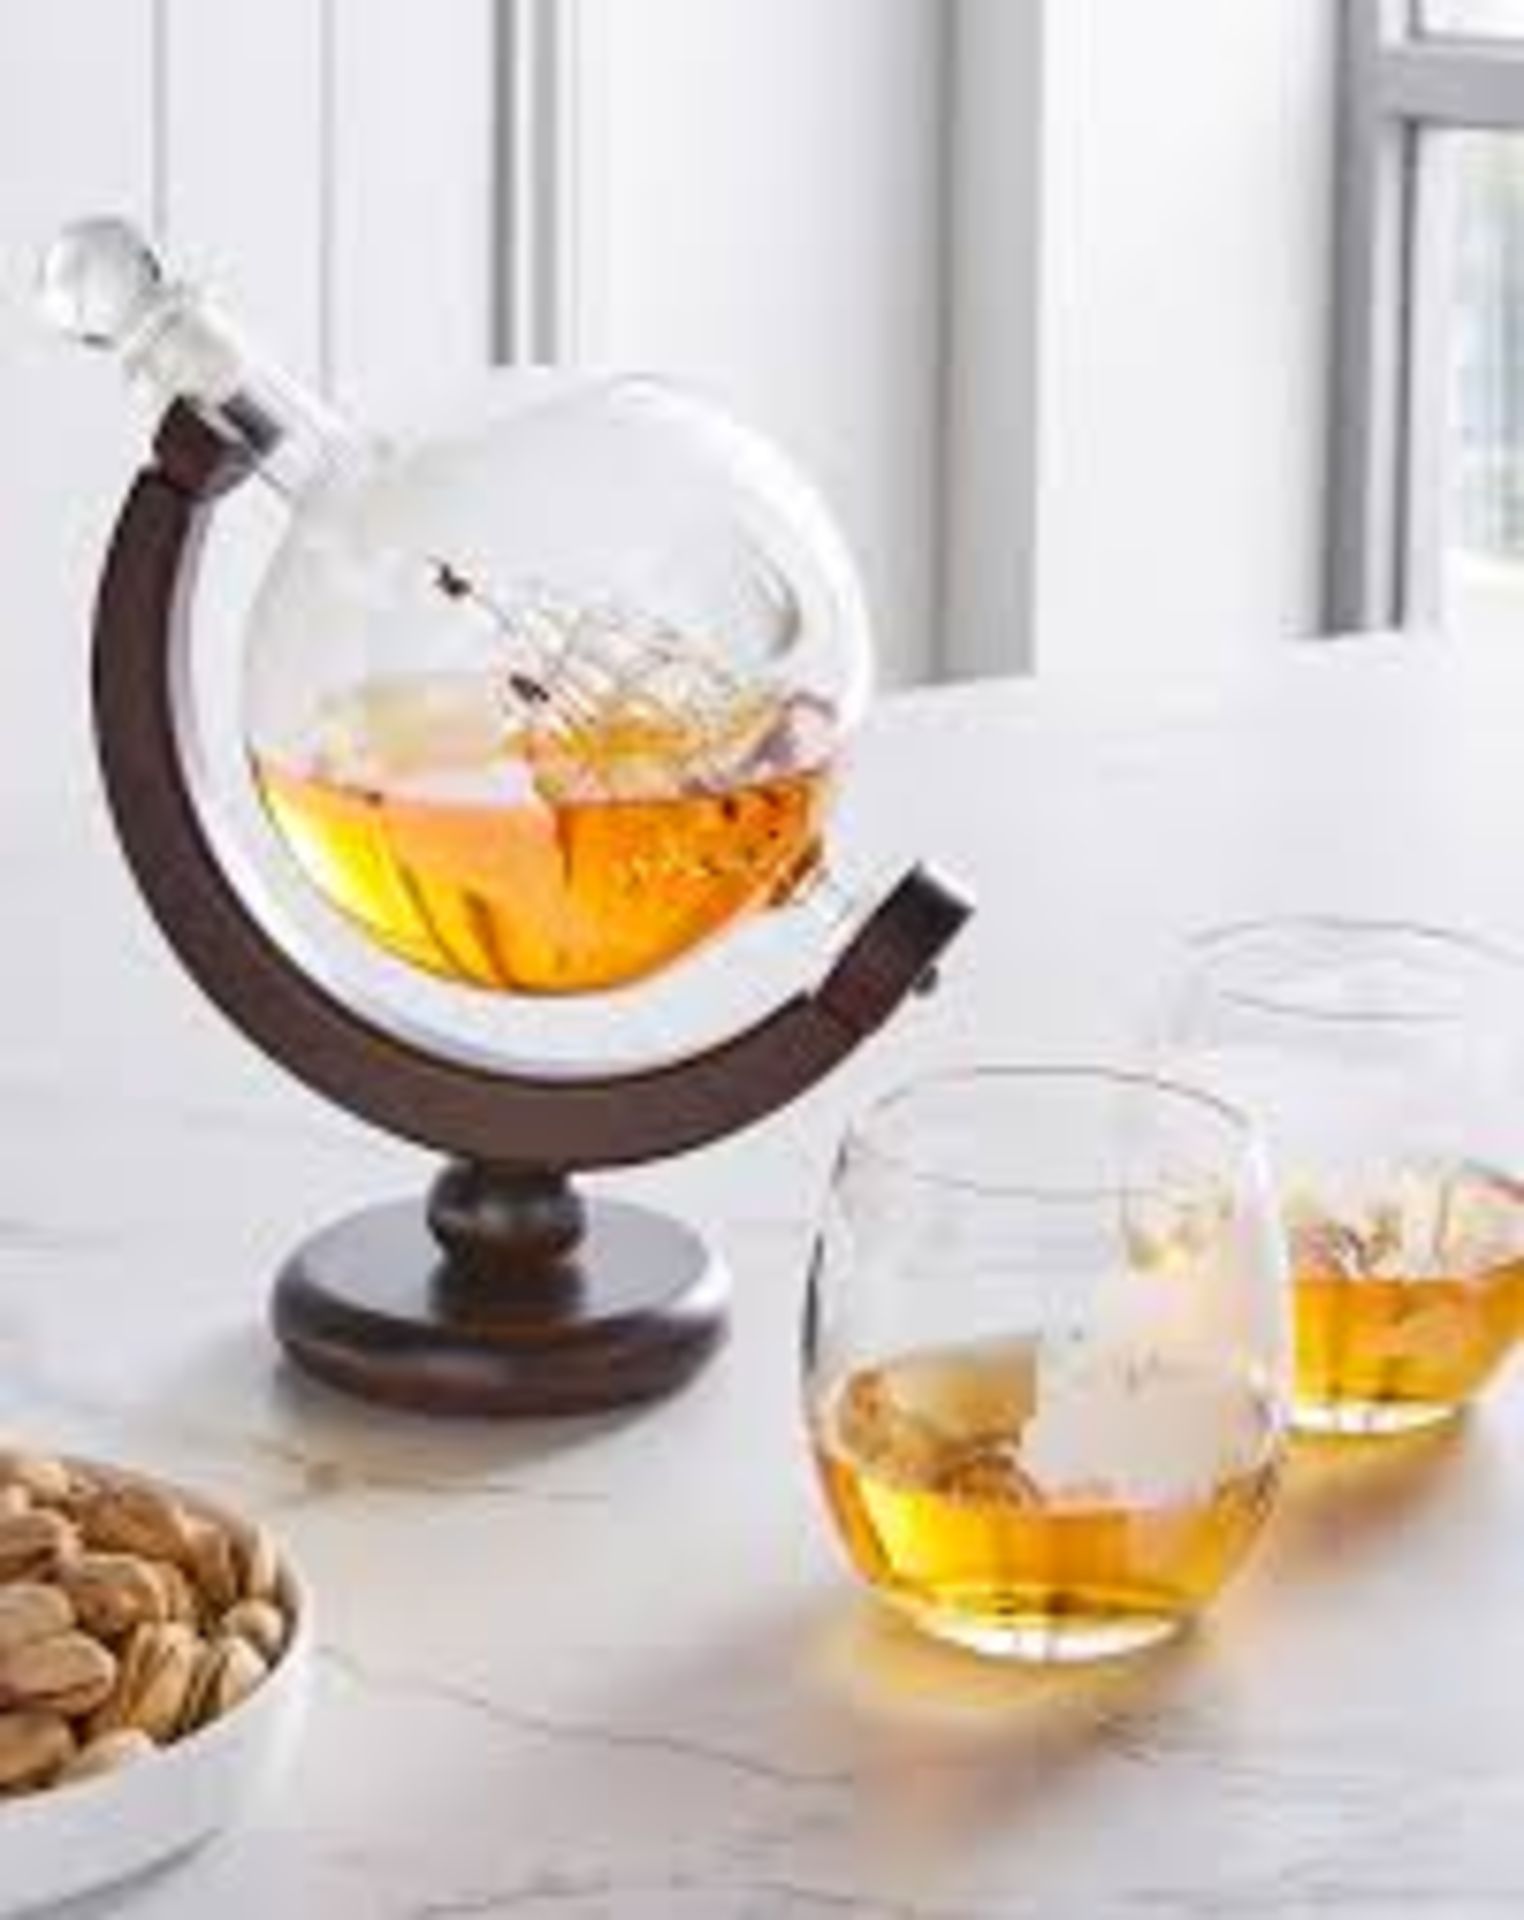 Globe Decanter and Glasses Set. - ER22. A decanter based on a classic globe, made from glass and